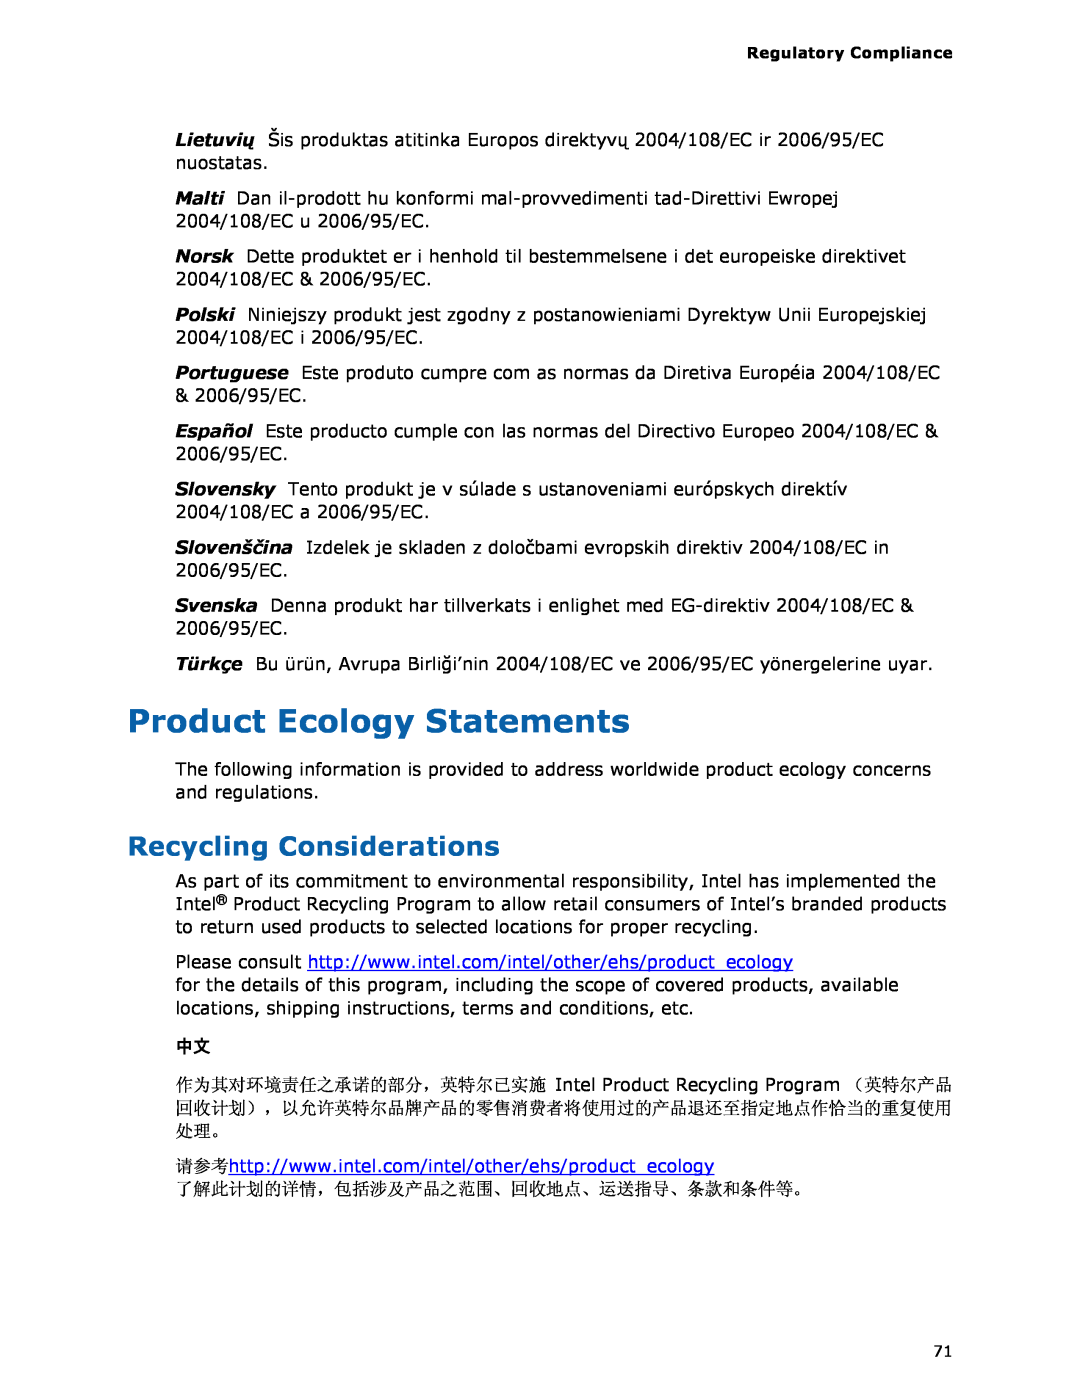 Intel BOXDH55HC manual Product Ecology Statements, Recycling Considerations 